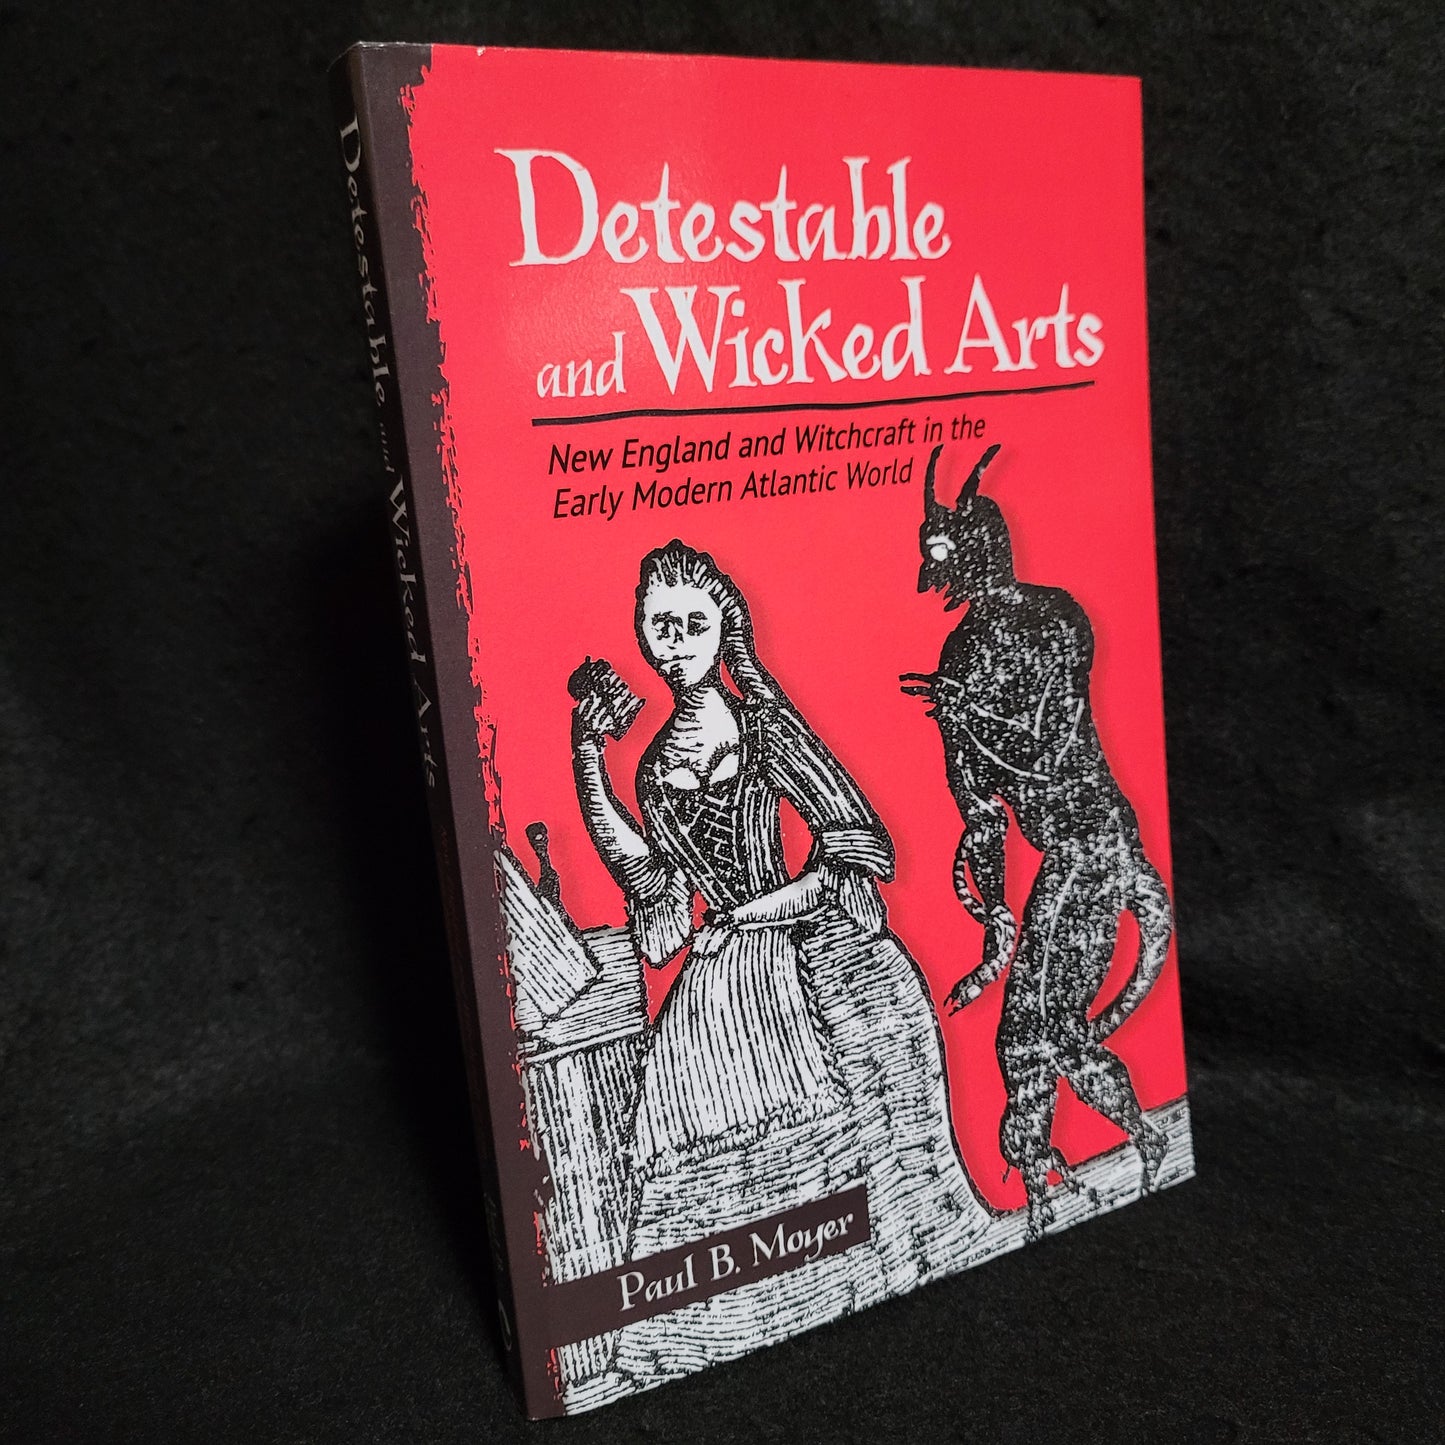 Detestable and Wicked Arts: New England and Witchcraft in the Early Modern Atlantic World by Paul B. Moyer (Cornell University Press, 2020) Paperback